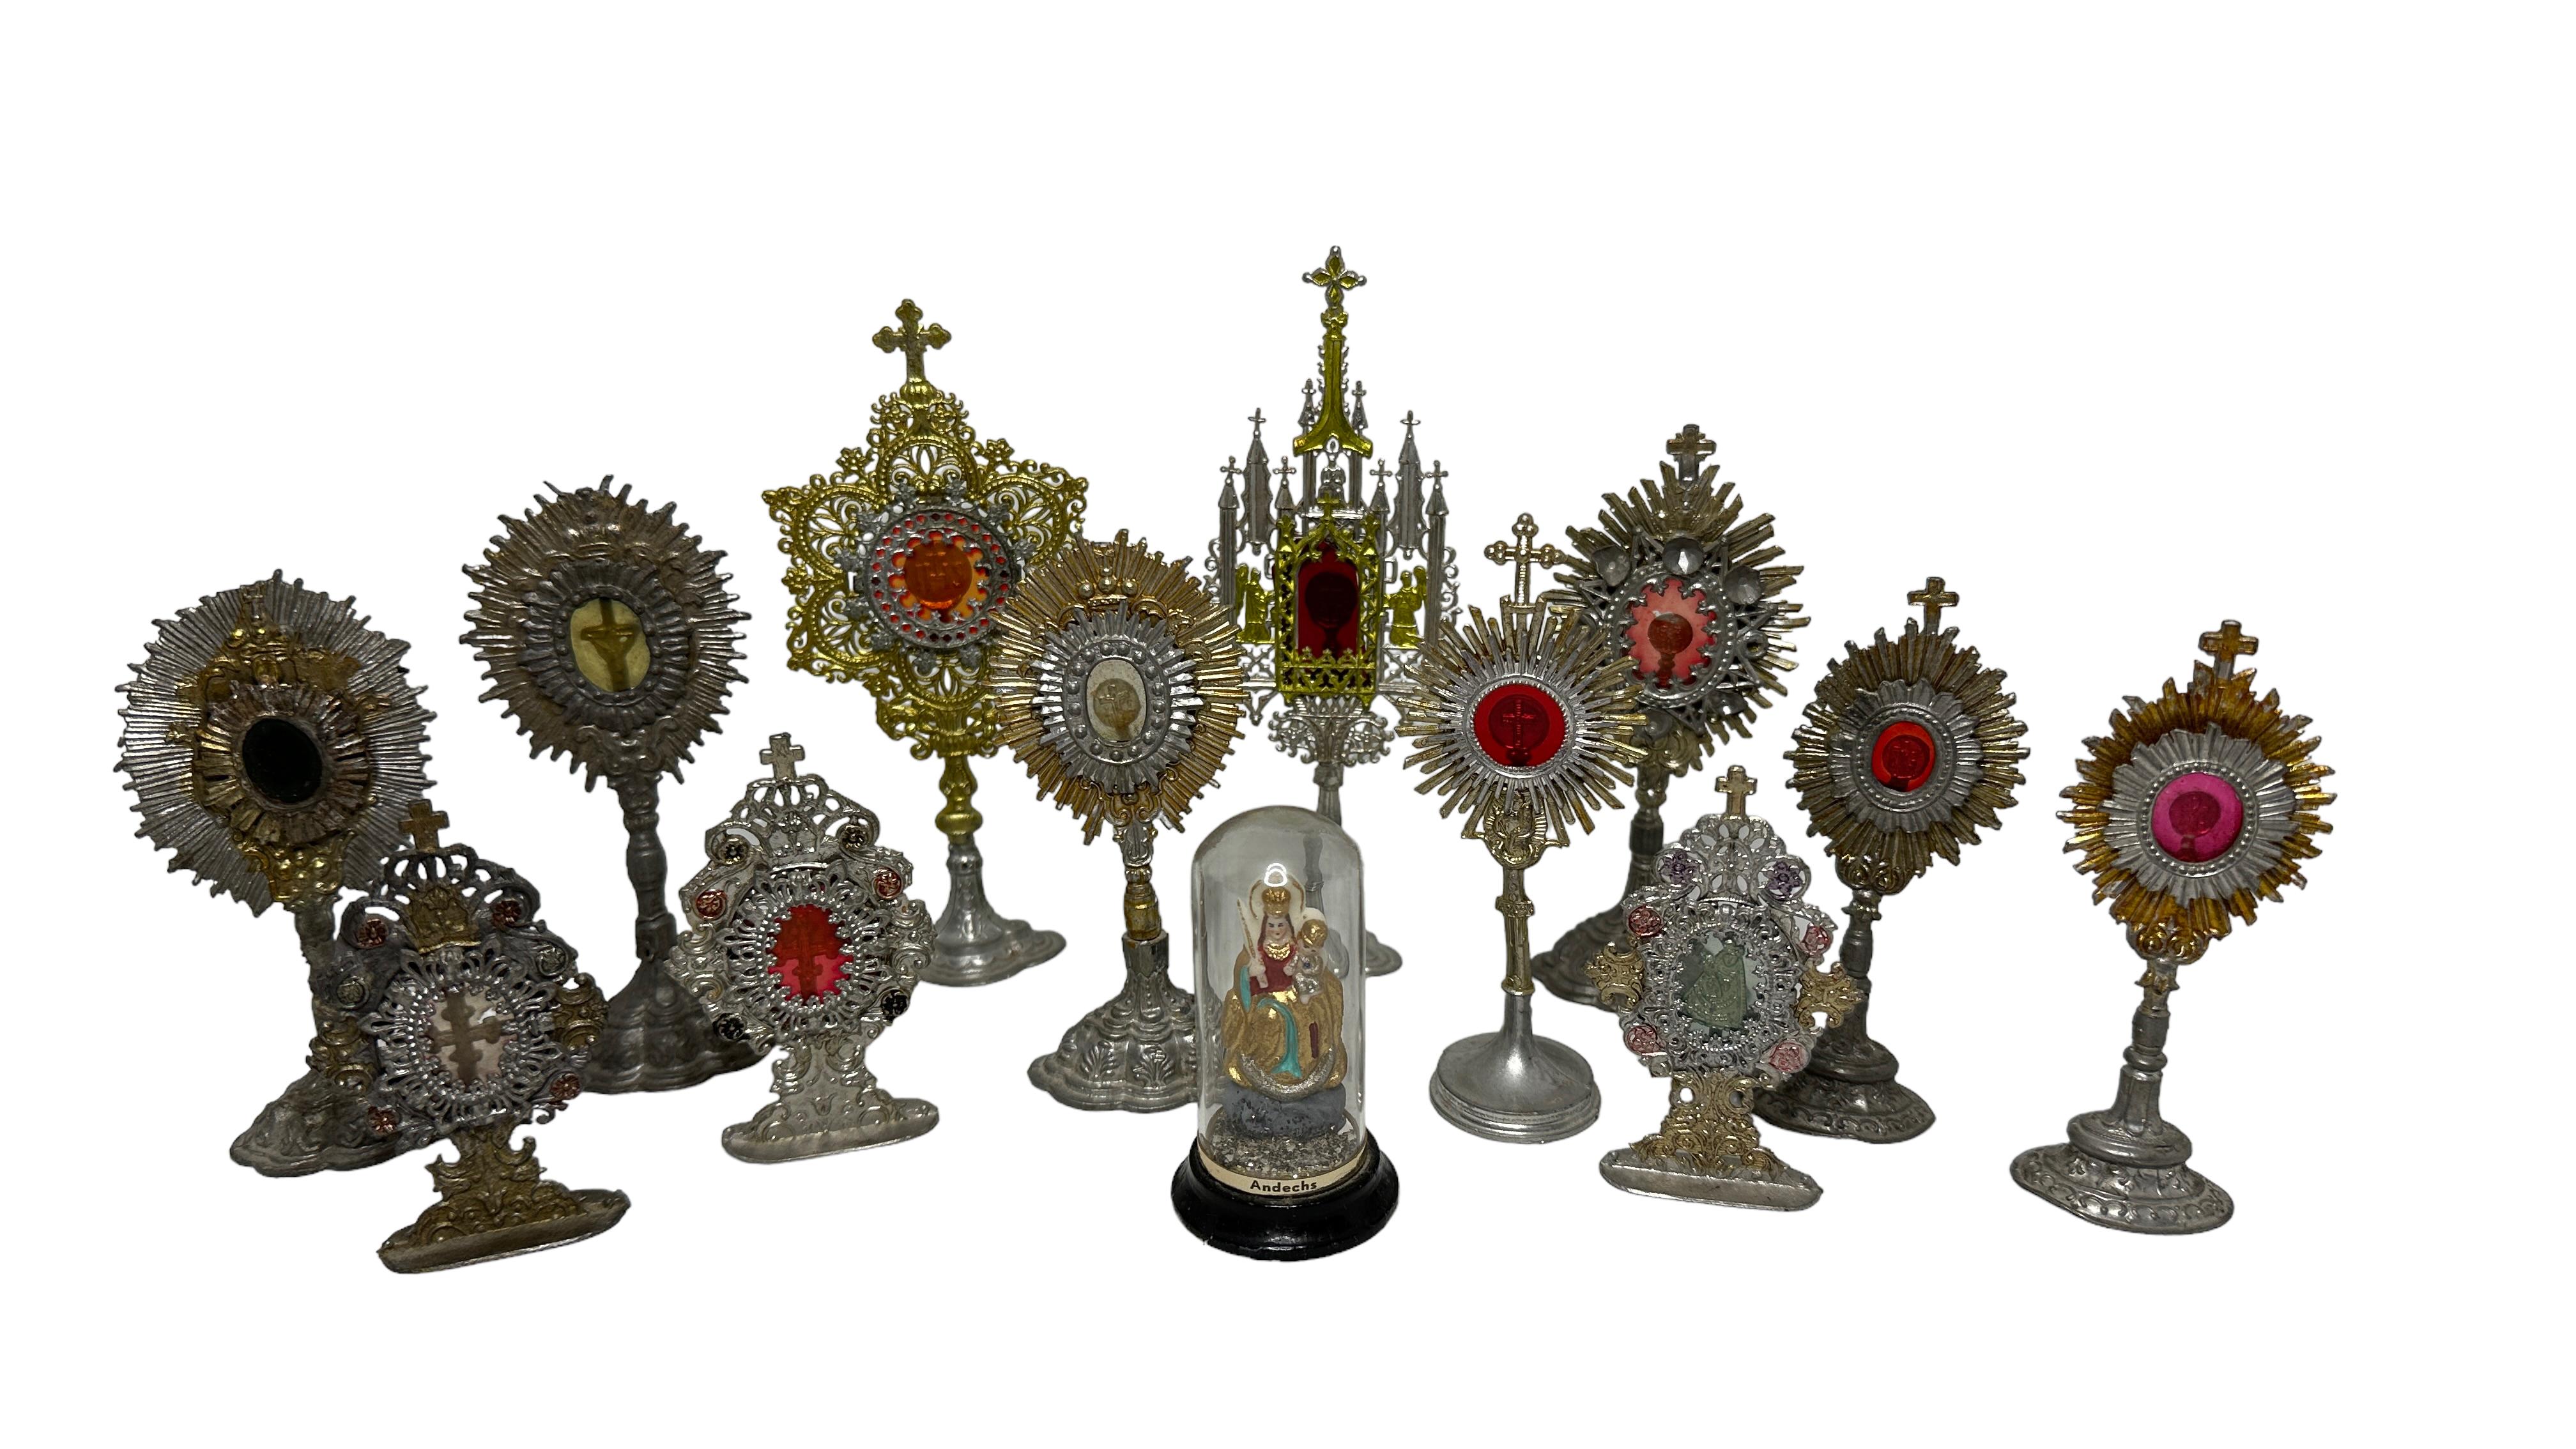 Here I have to offer a fine antique classic early 20th century selection of House Altar Christianity miniatures and accessories. A wonderful decorative appeal! Each was made in Germany and was purchased out of on old Household.
These is a truly